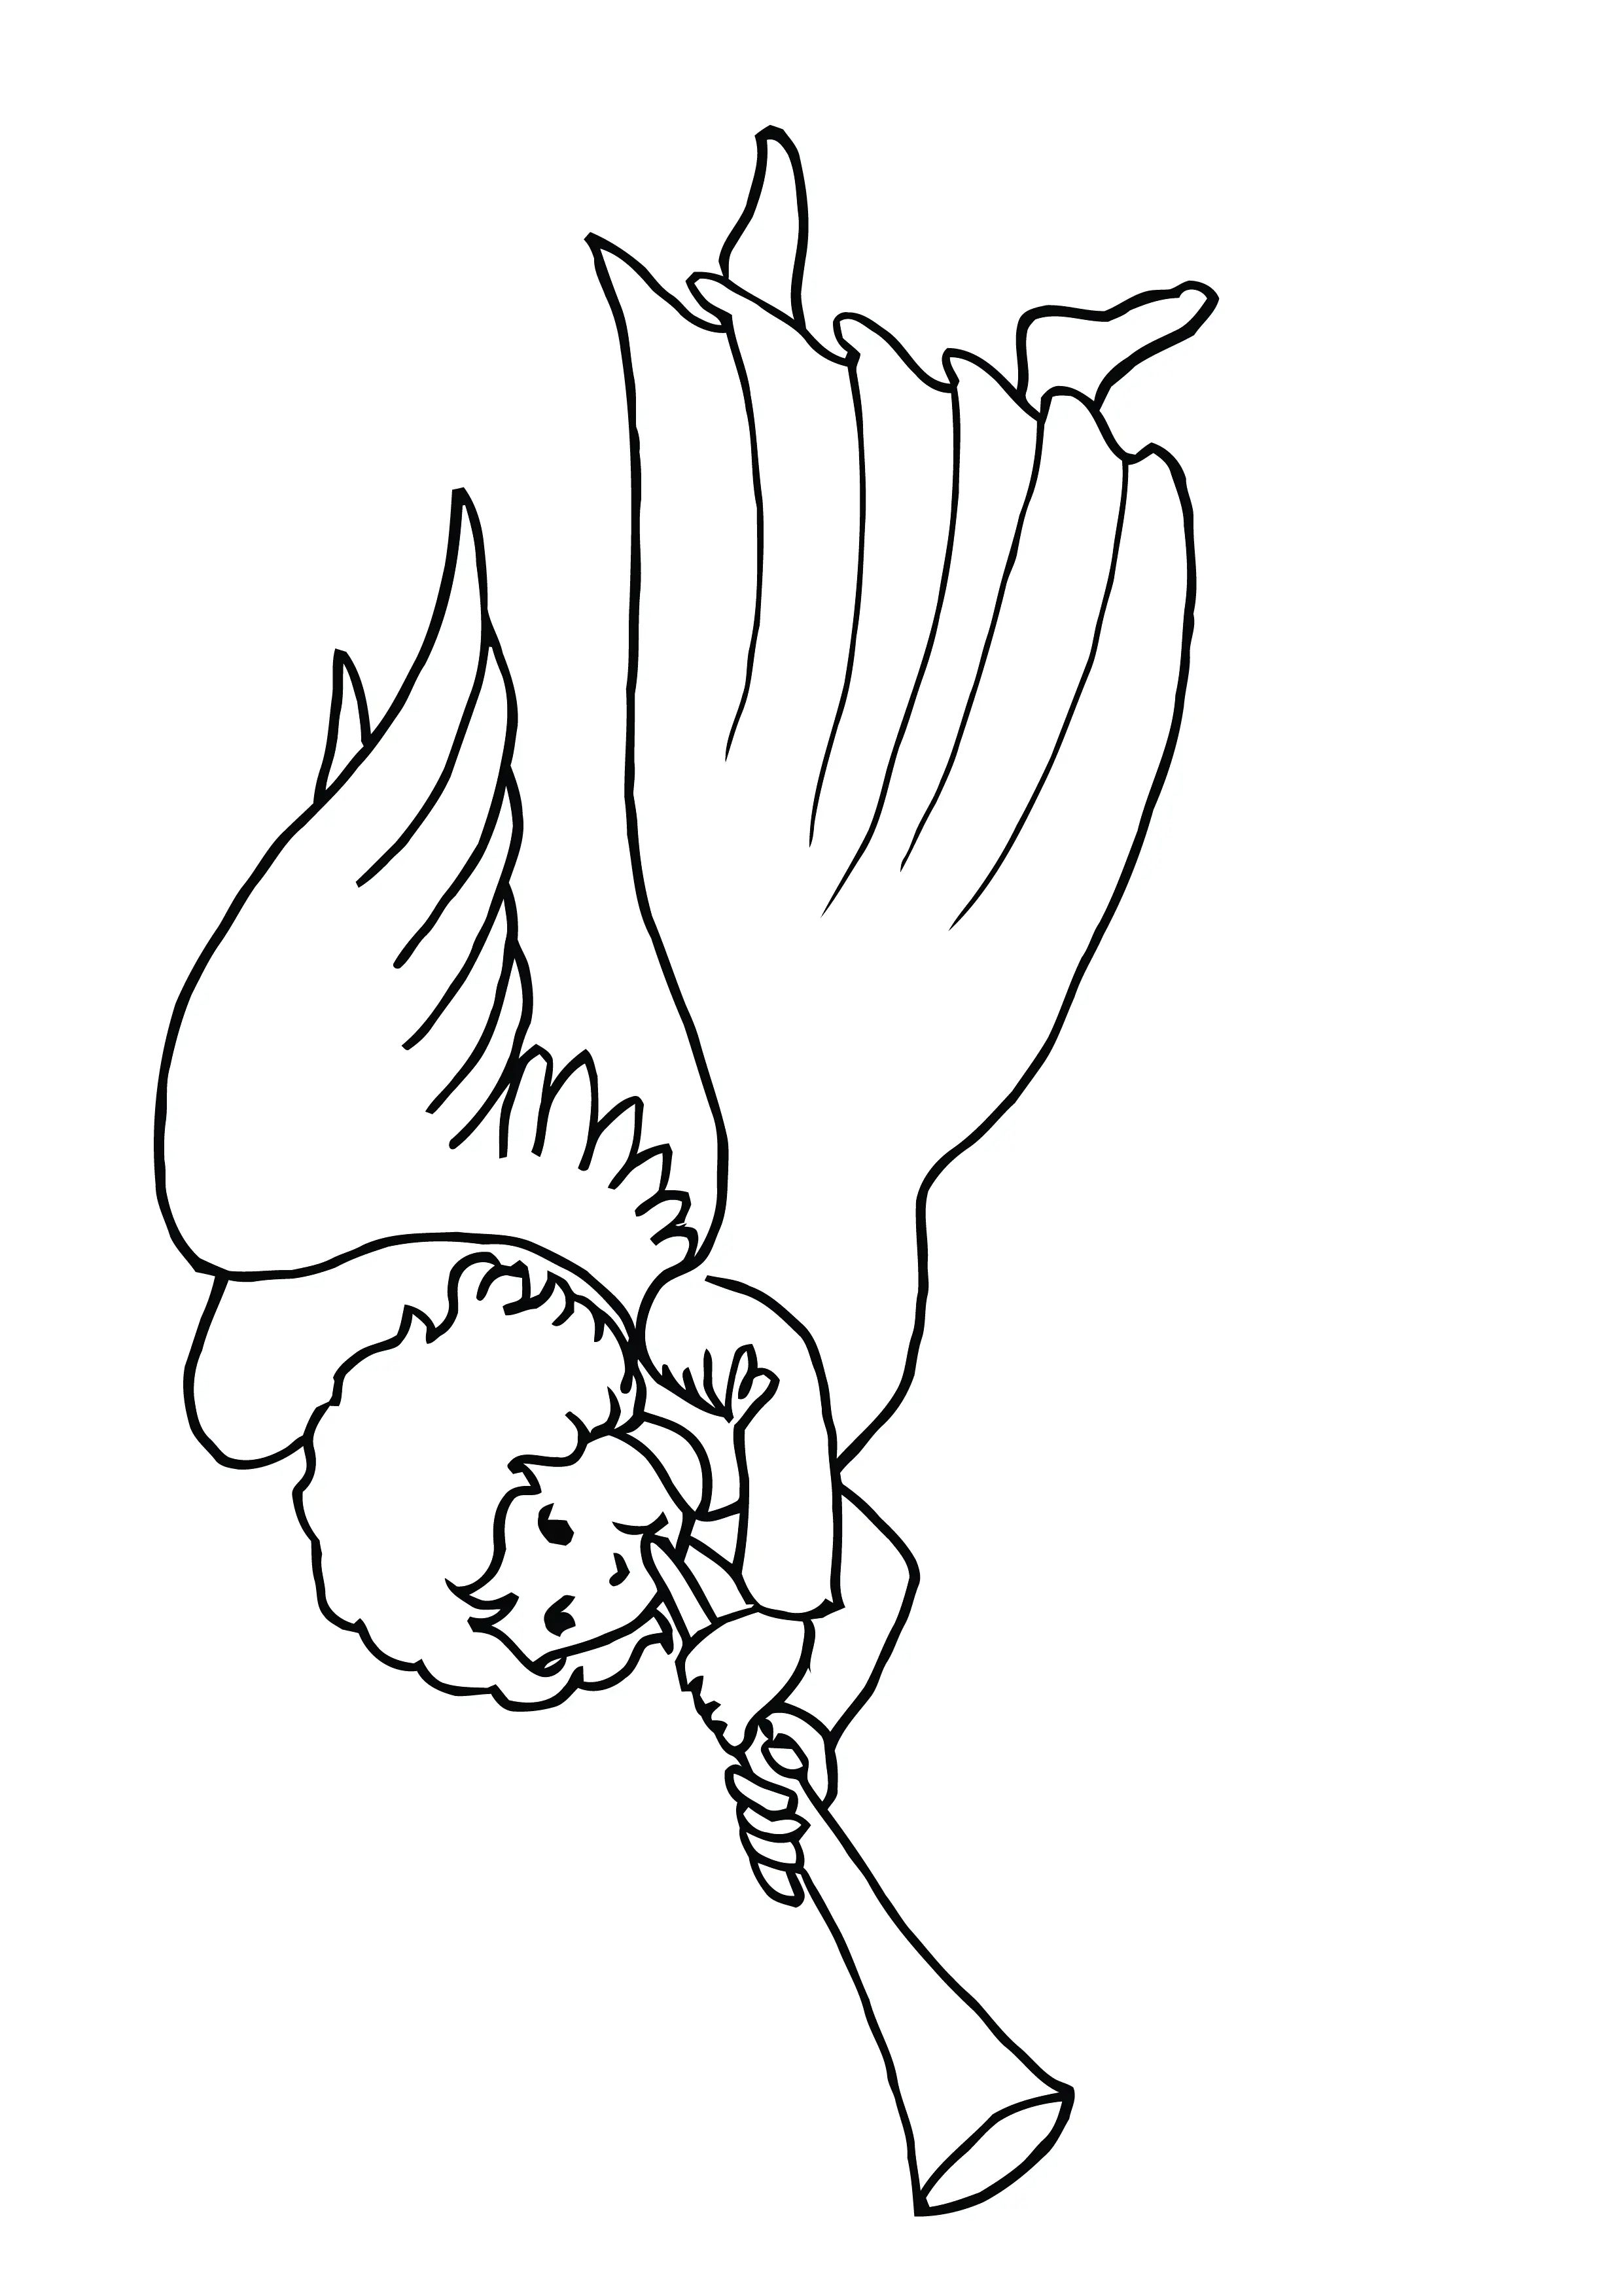 Christian Christmas Angel With Wings Blowing Horn Friendly Free Clipart Coloring Pages for Kids Art Activities Line Art